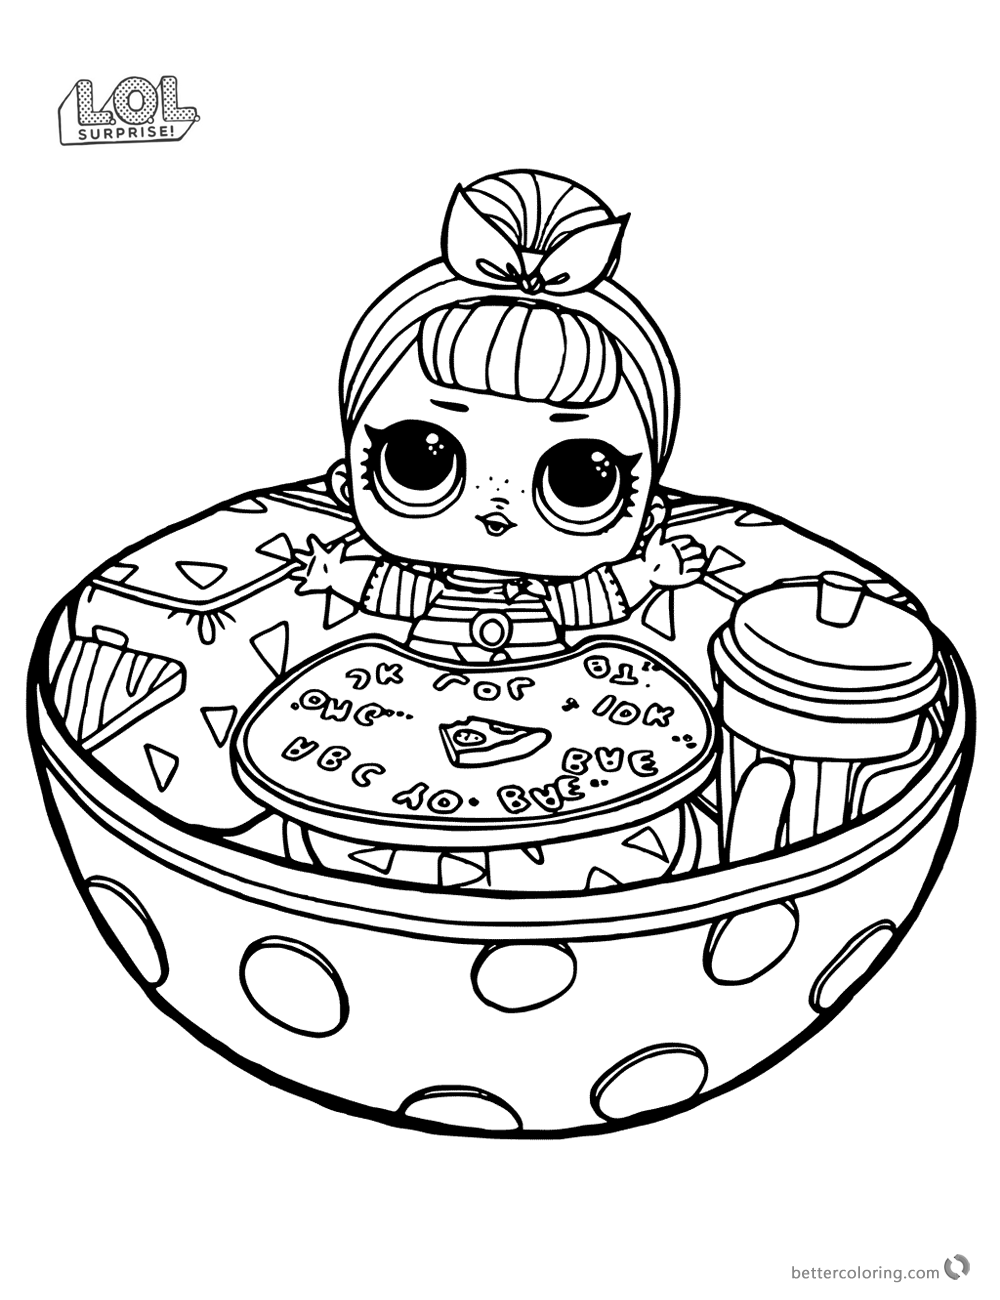 chucky coloring pages chucky doll coloring pages american coloring book coloring